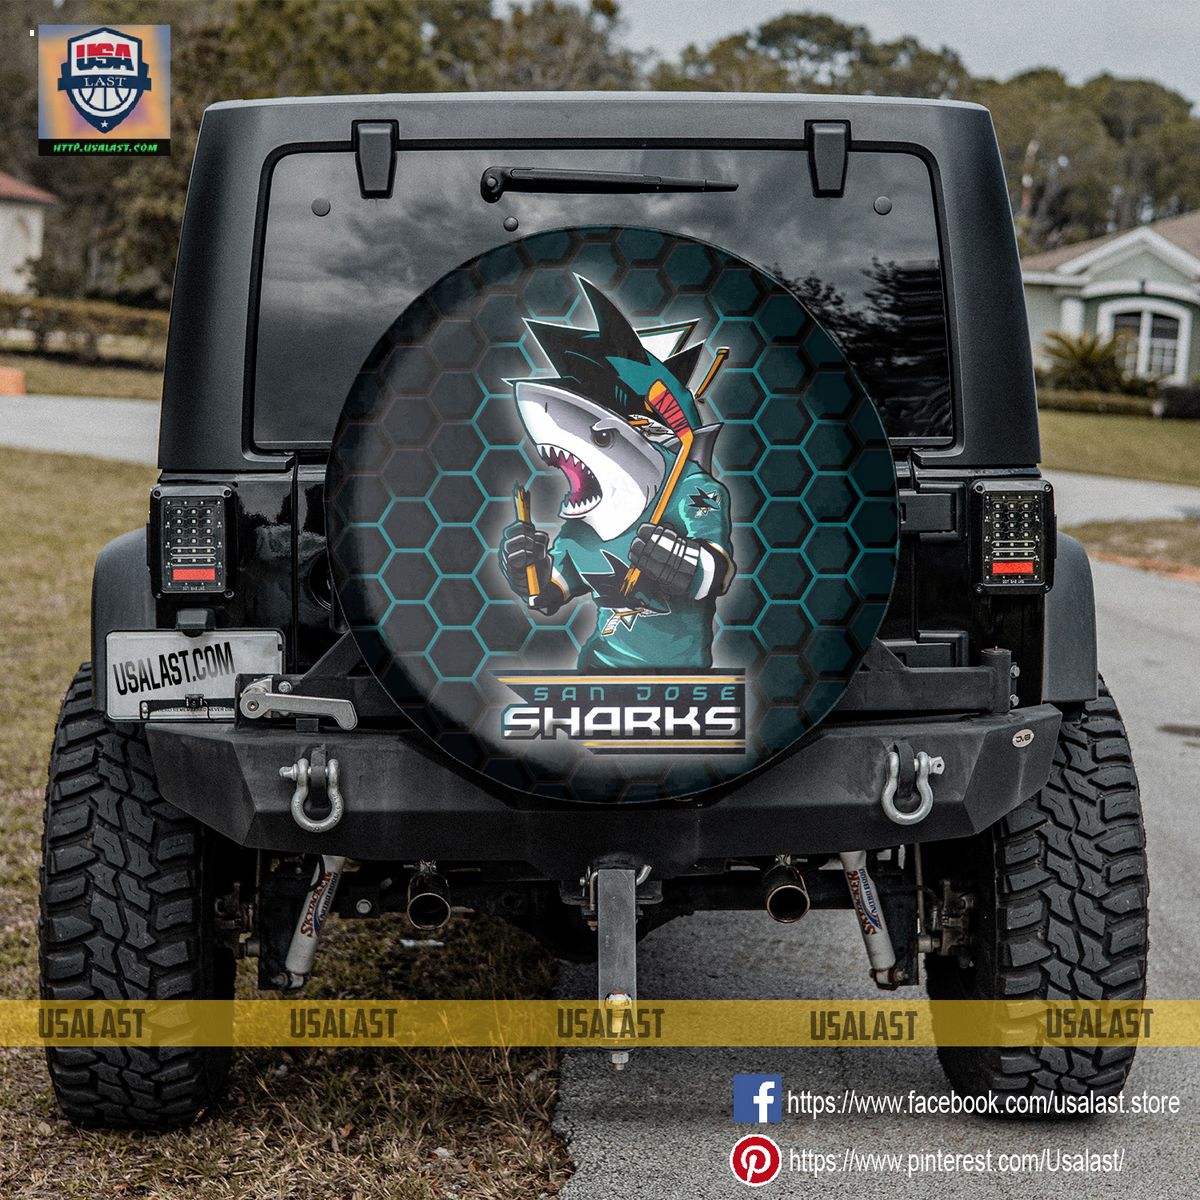 San Jose Sharks MLB Mascot Spare Tire Cover - Our hard working soul